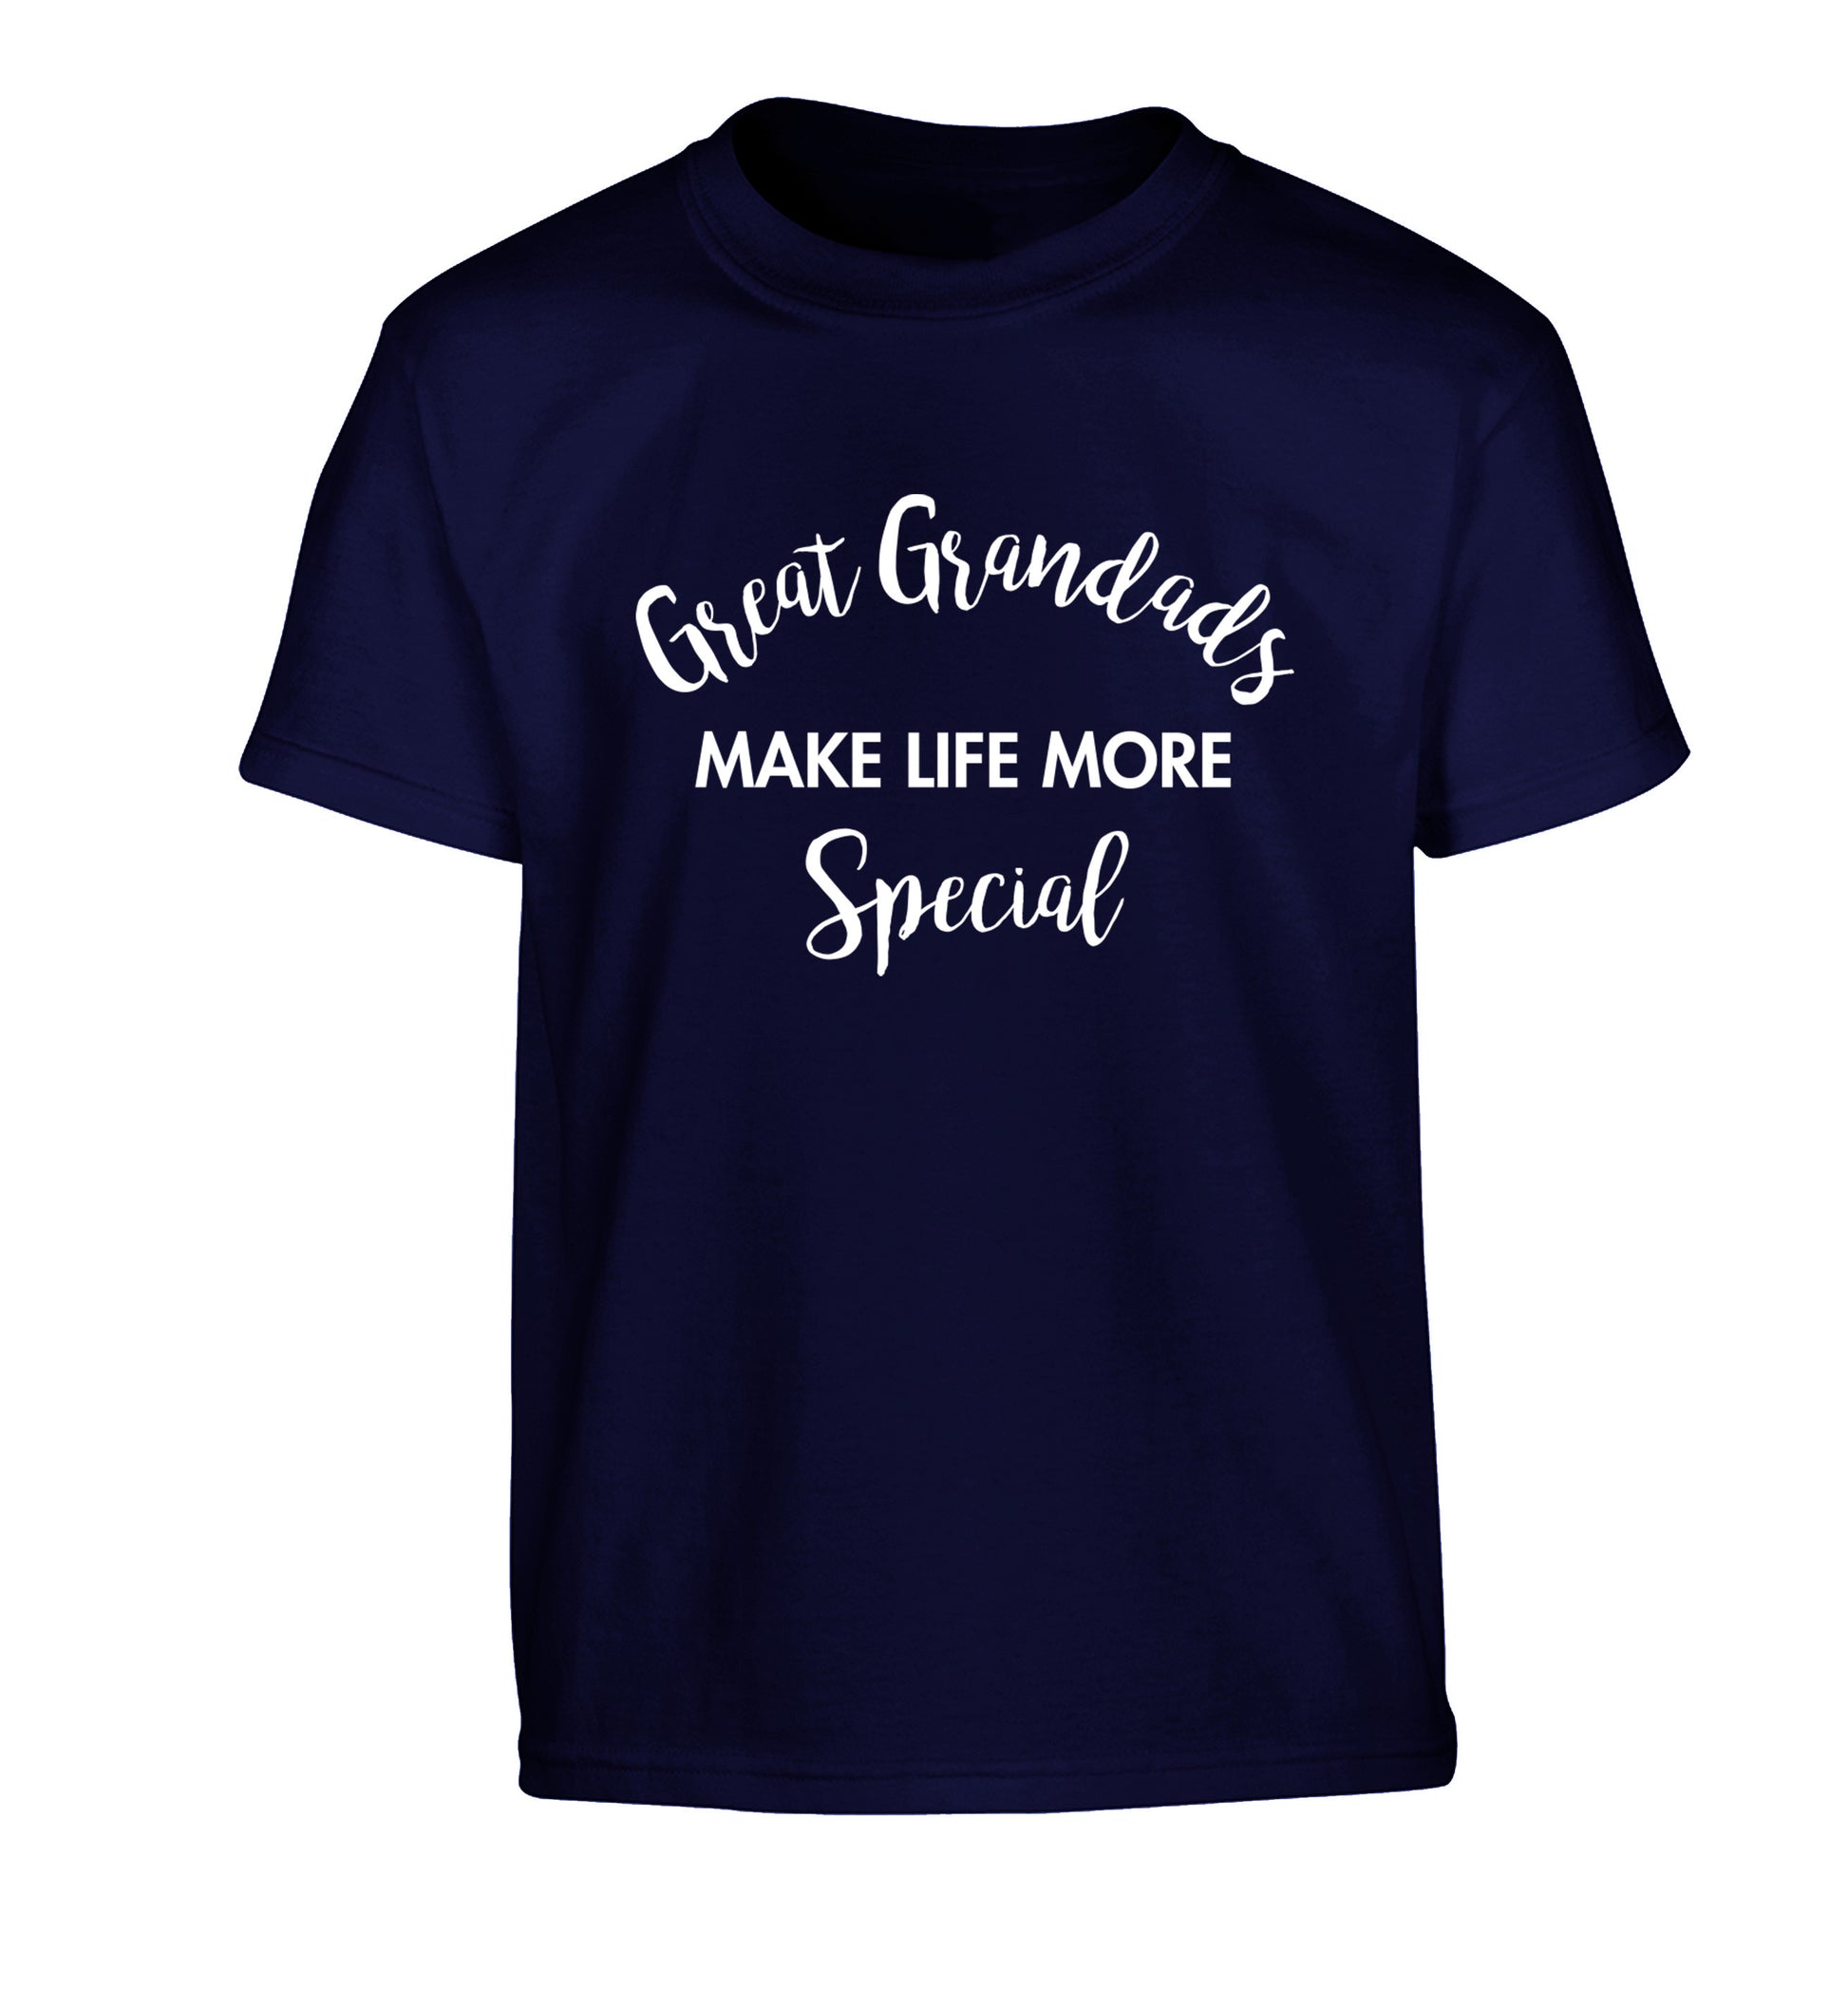 Great Grandads make life more special Children's navy Tshirt 12-14 Years